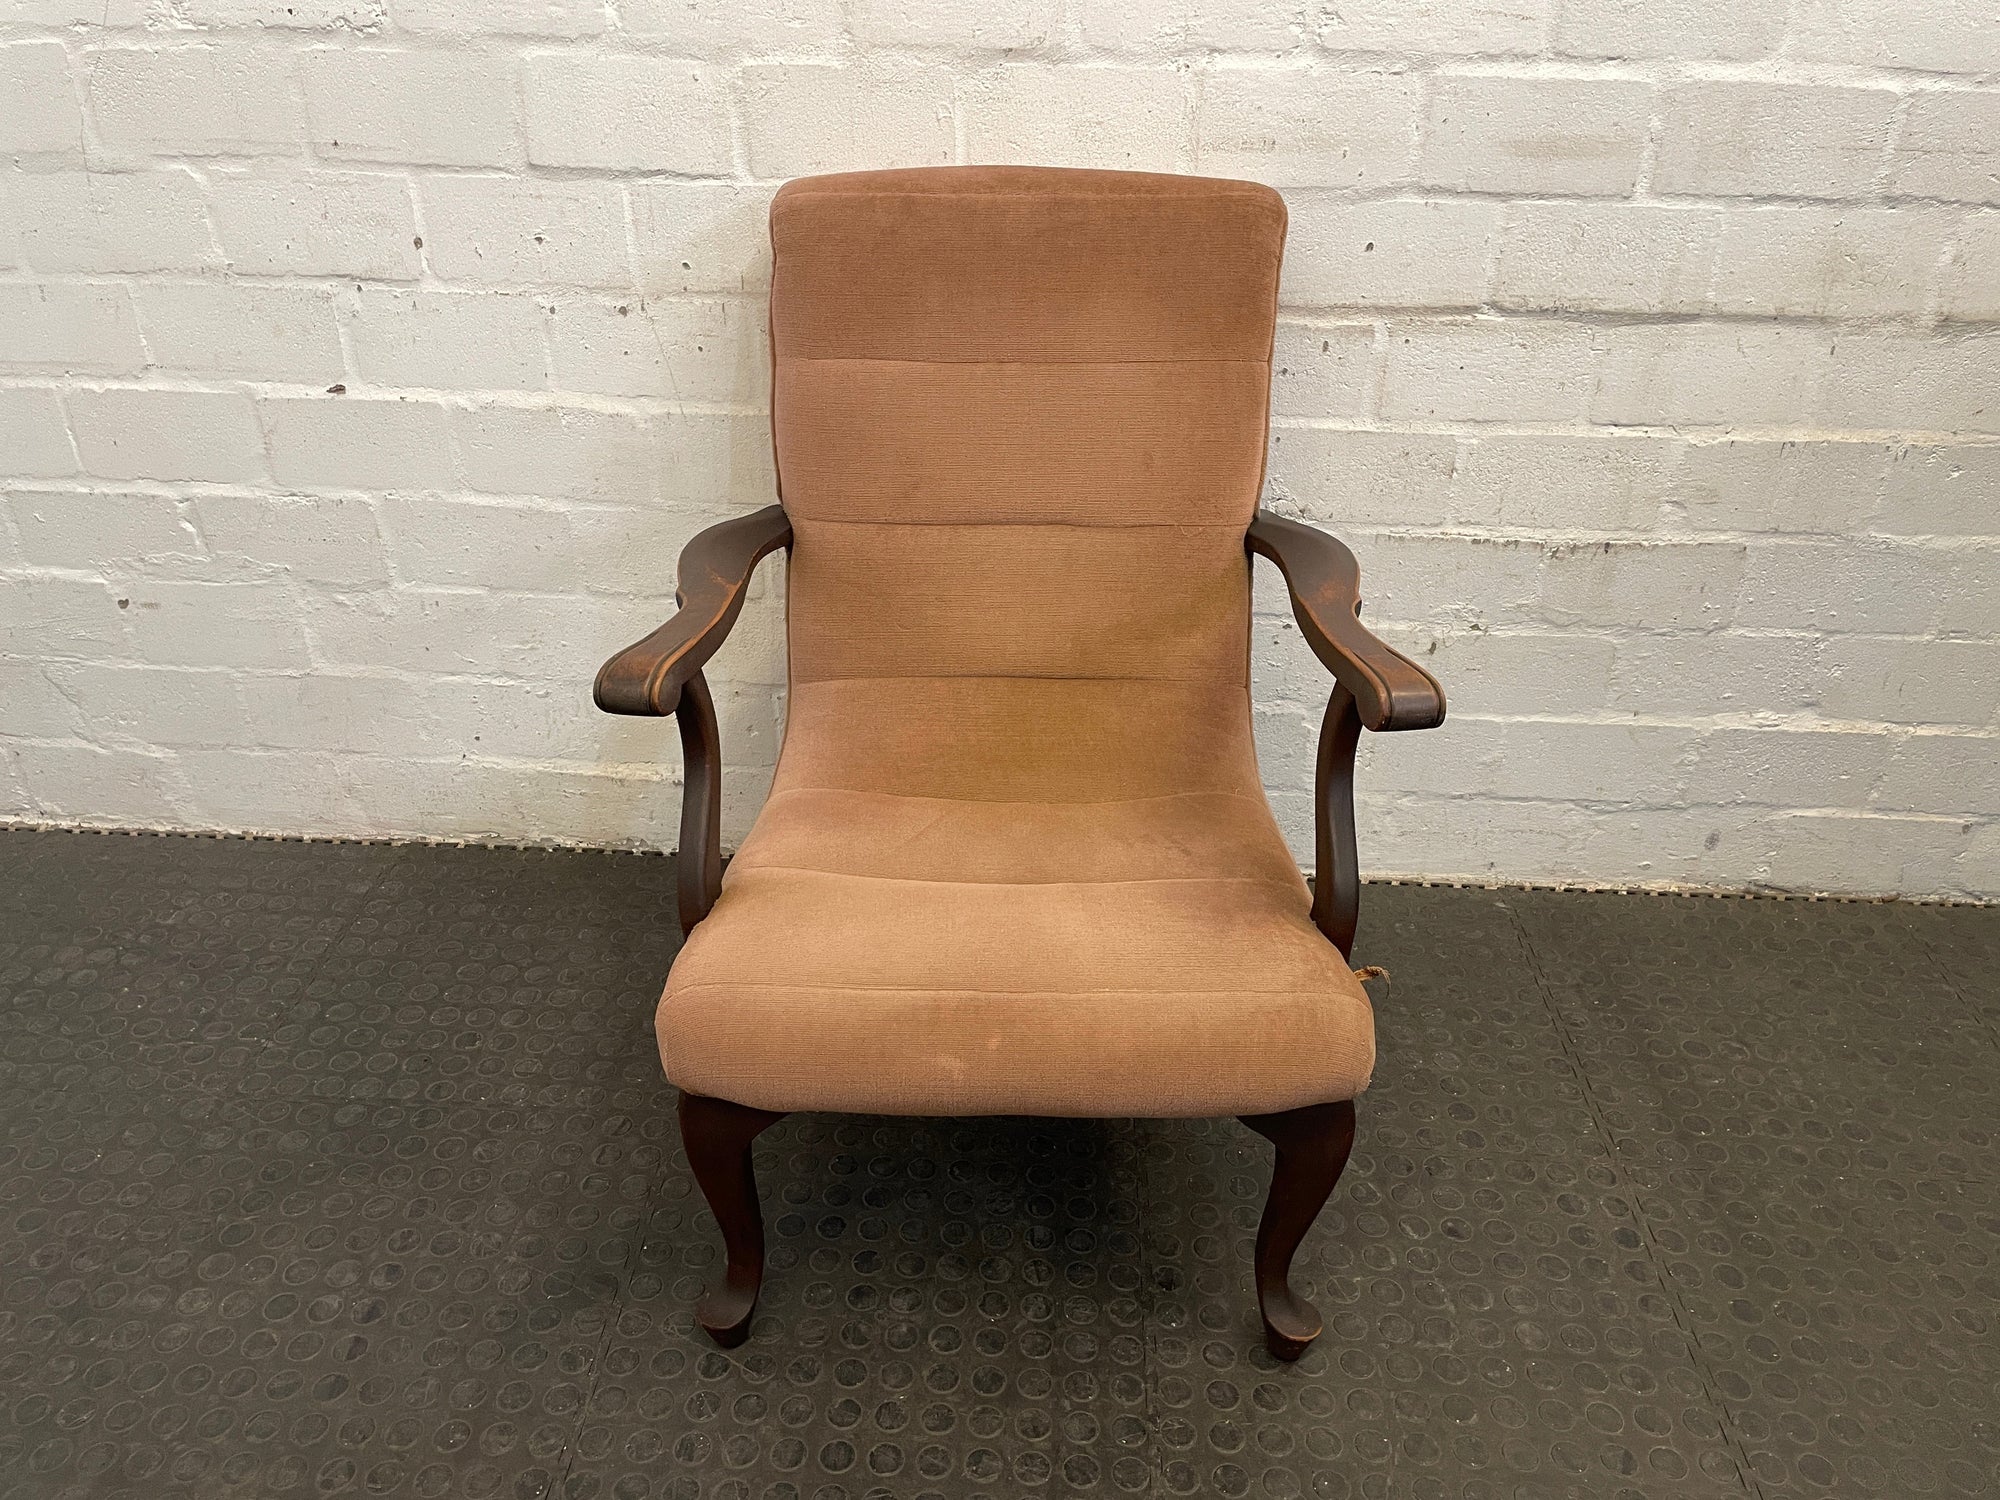 Wooden Beige-Cushioned Arm Chair - PRICE DROP